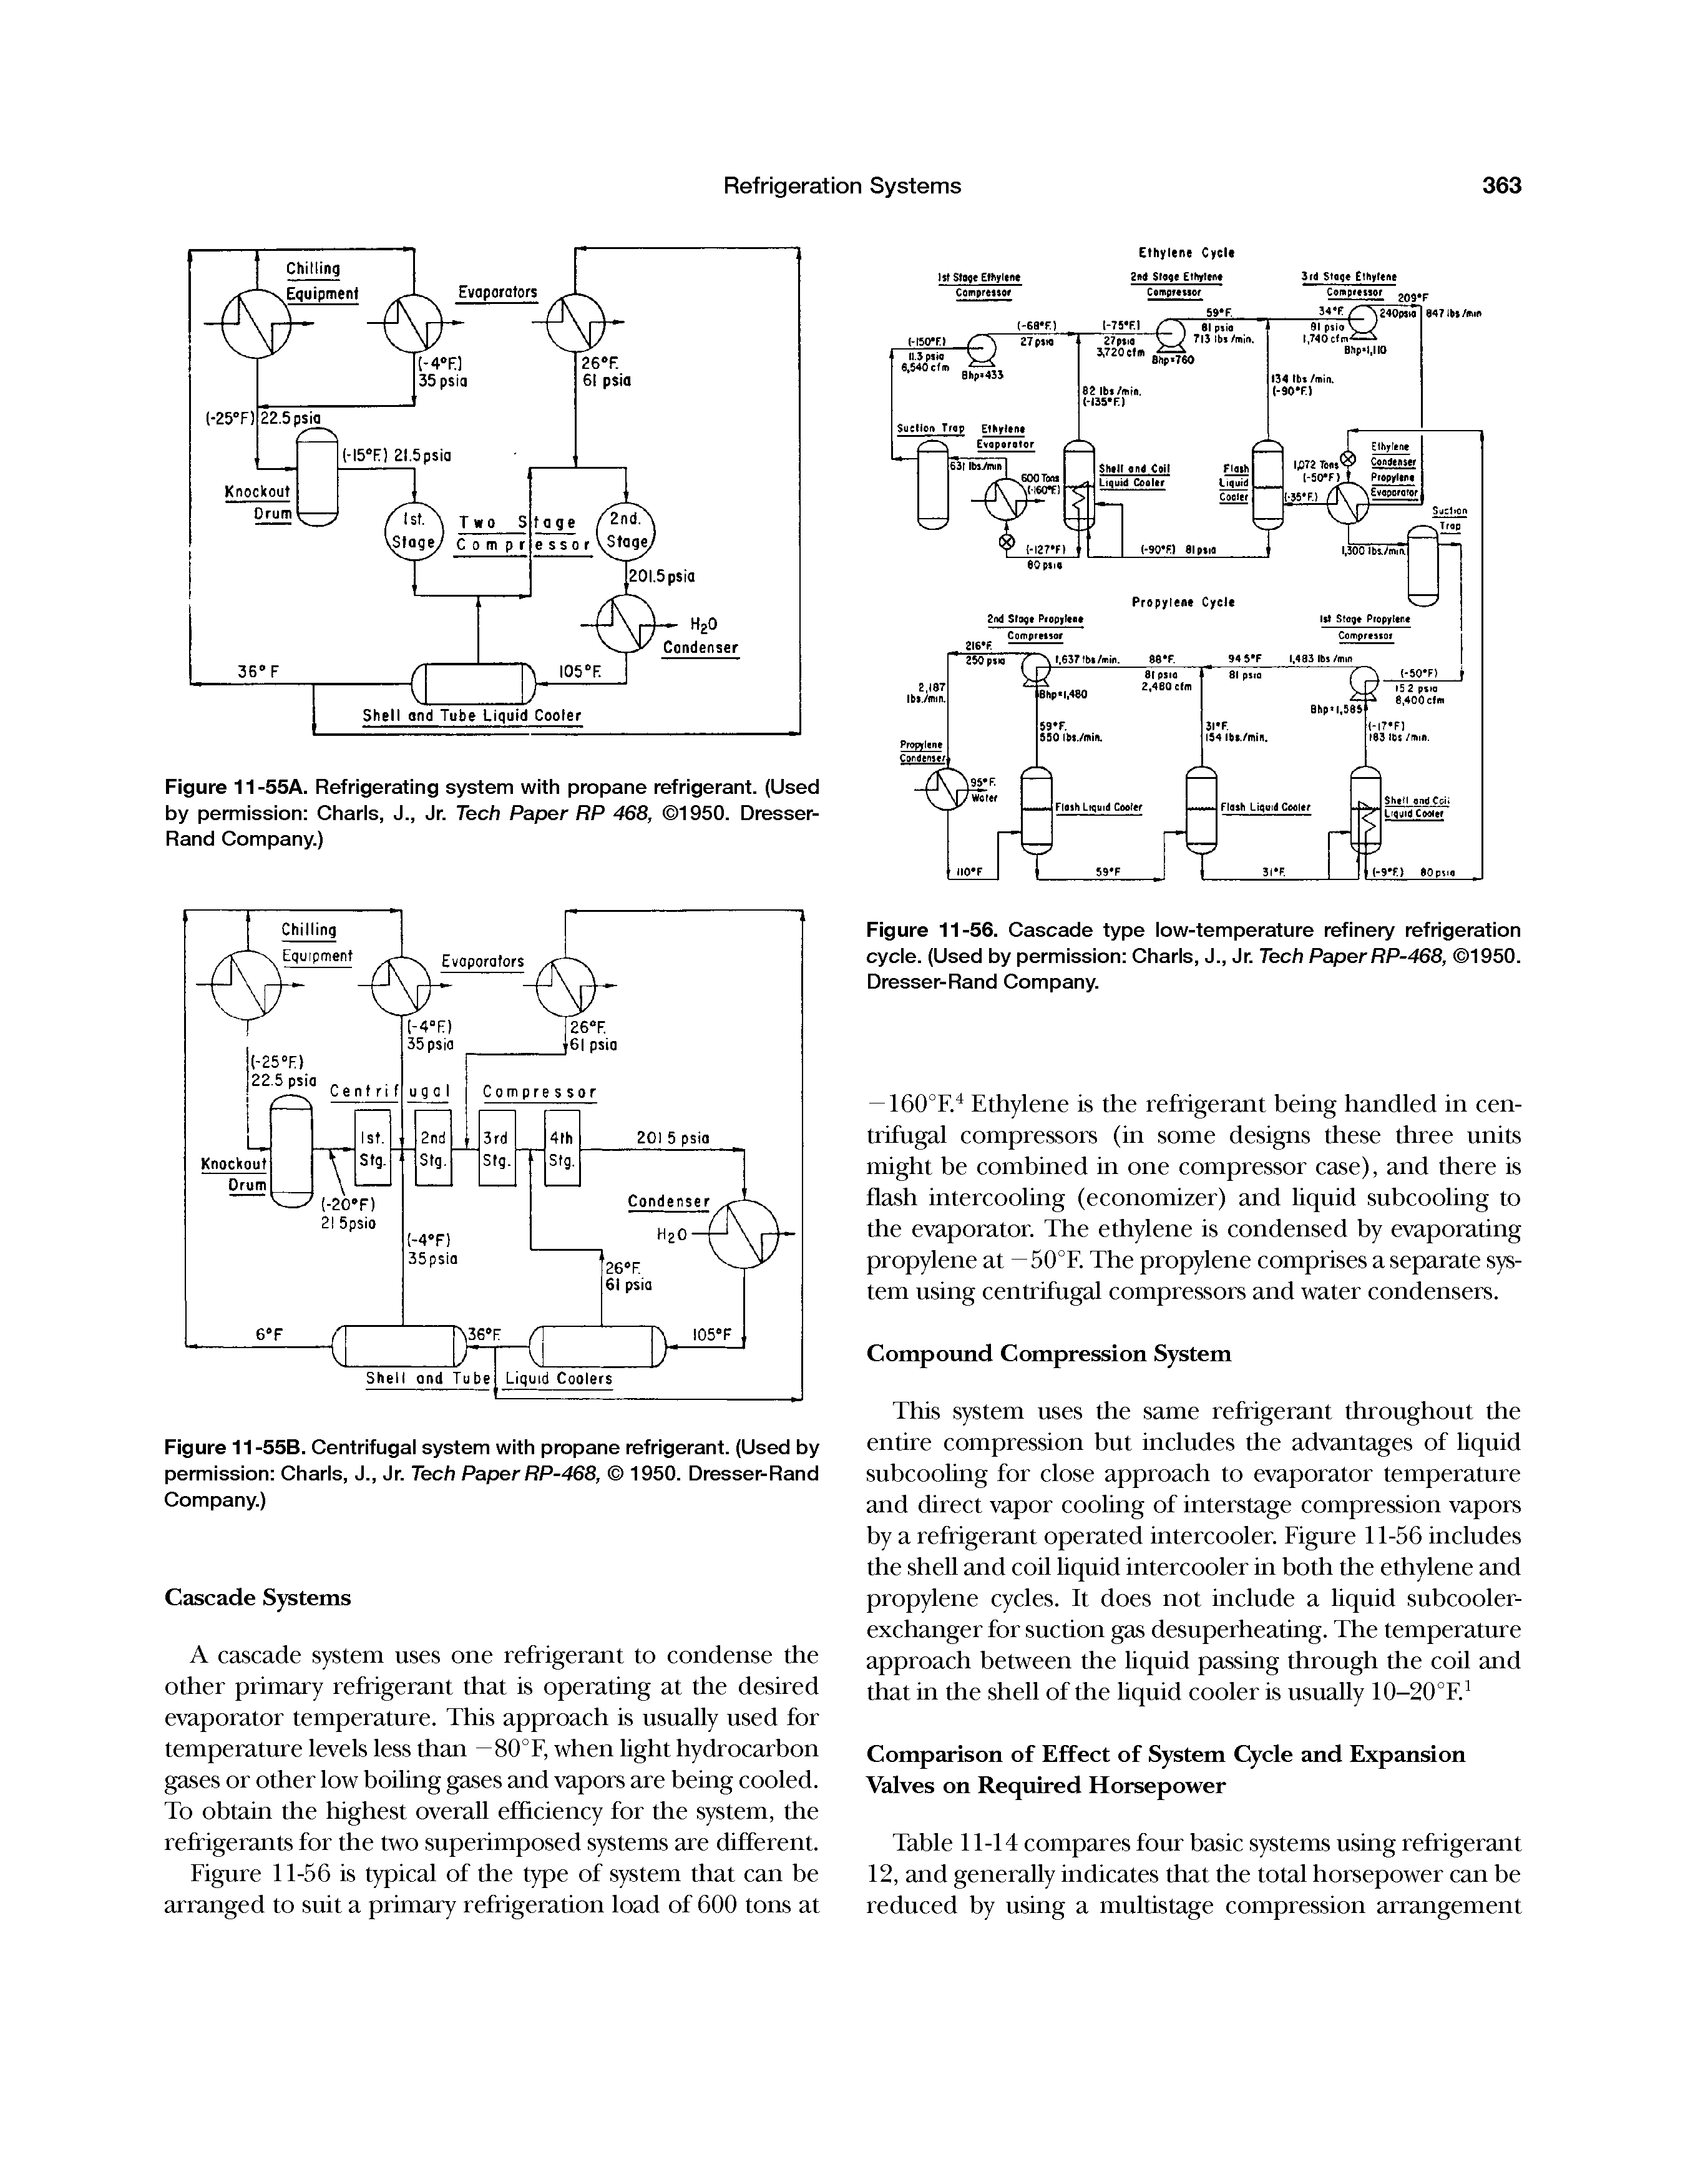 Figure 11-56. Cascade type low-temperature refinery refrigeration cycle. (Used by permission Charls, J., Jr. Tech Paper RP-468, 1950. Dresser-Rand Company.